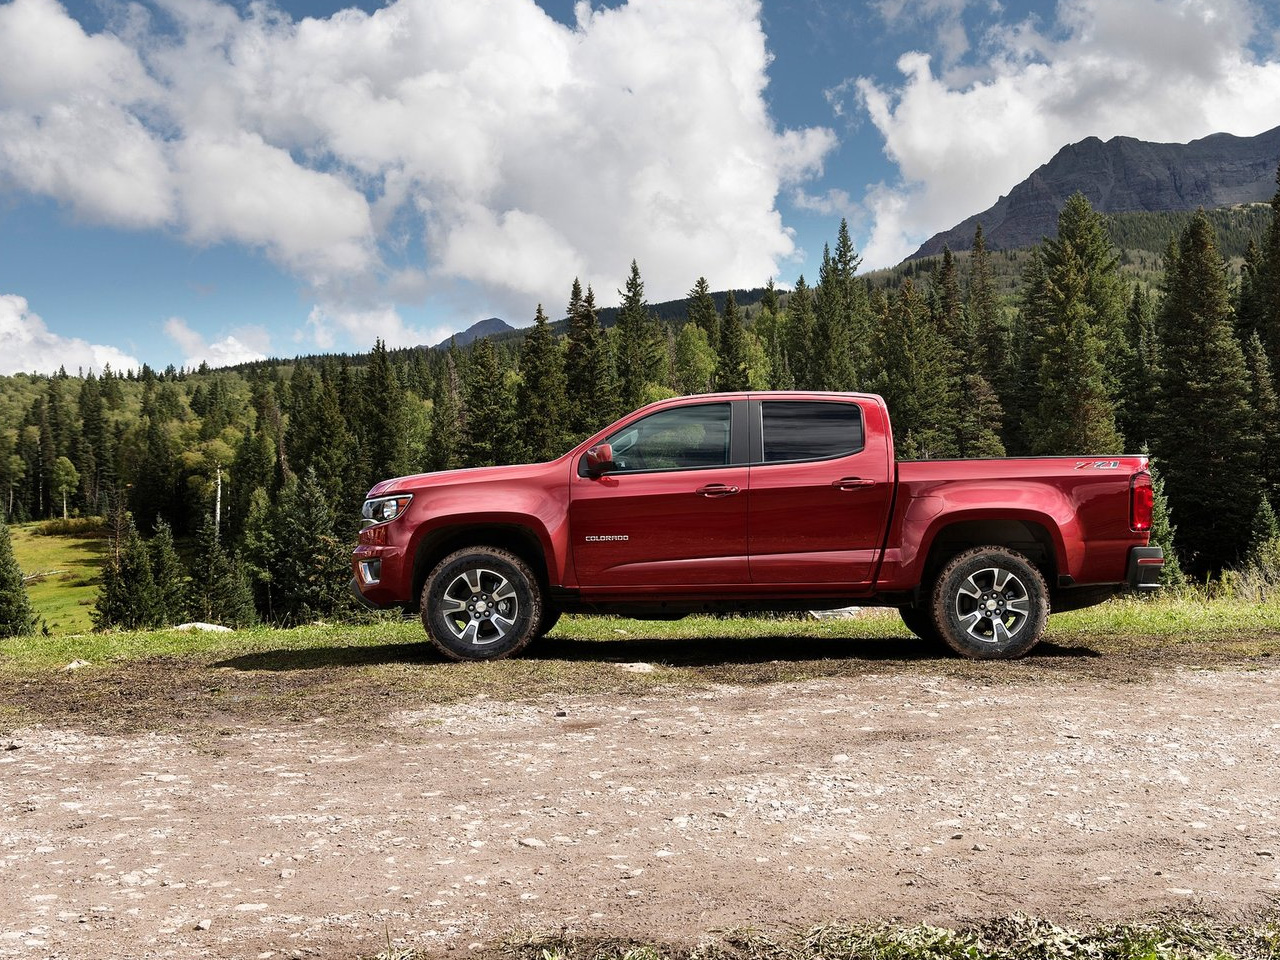 Chevy Colorado Wallpaper S High Resolution Image For